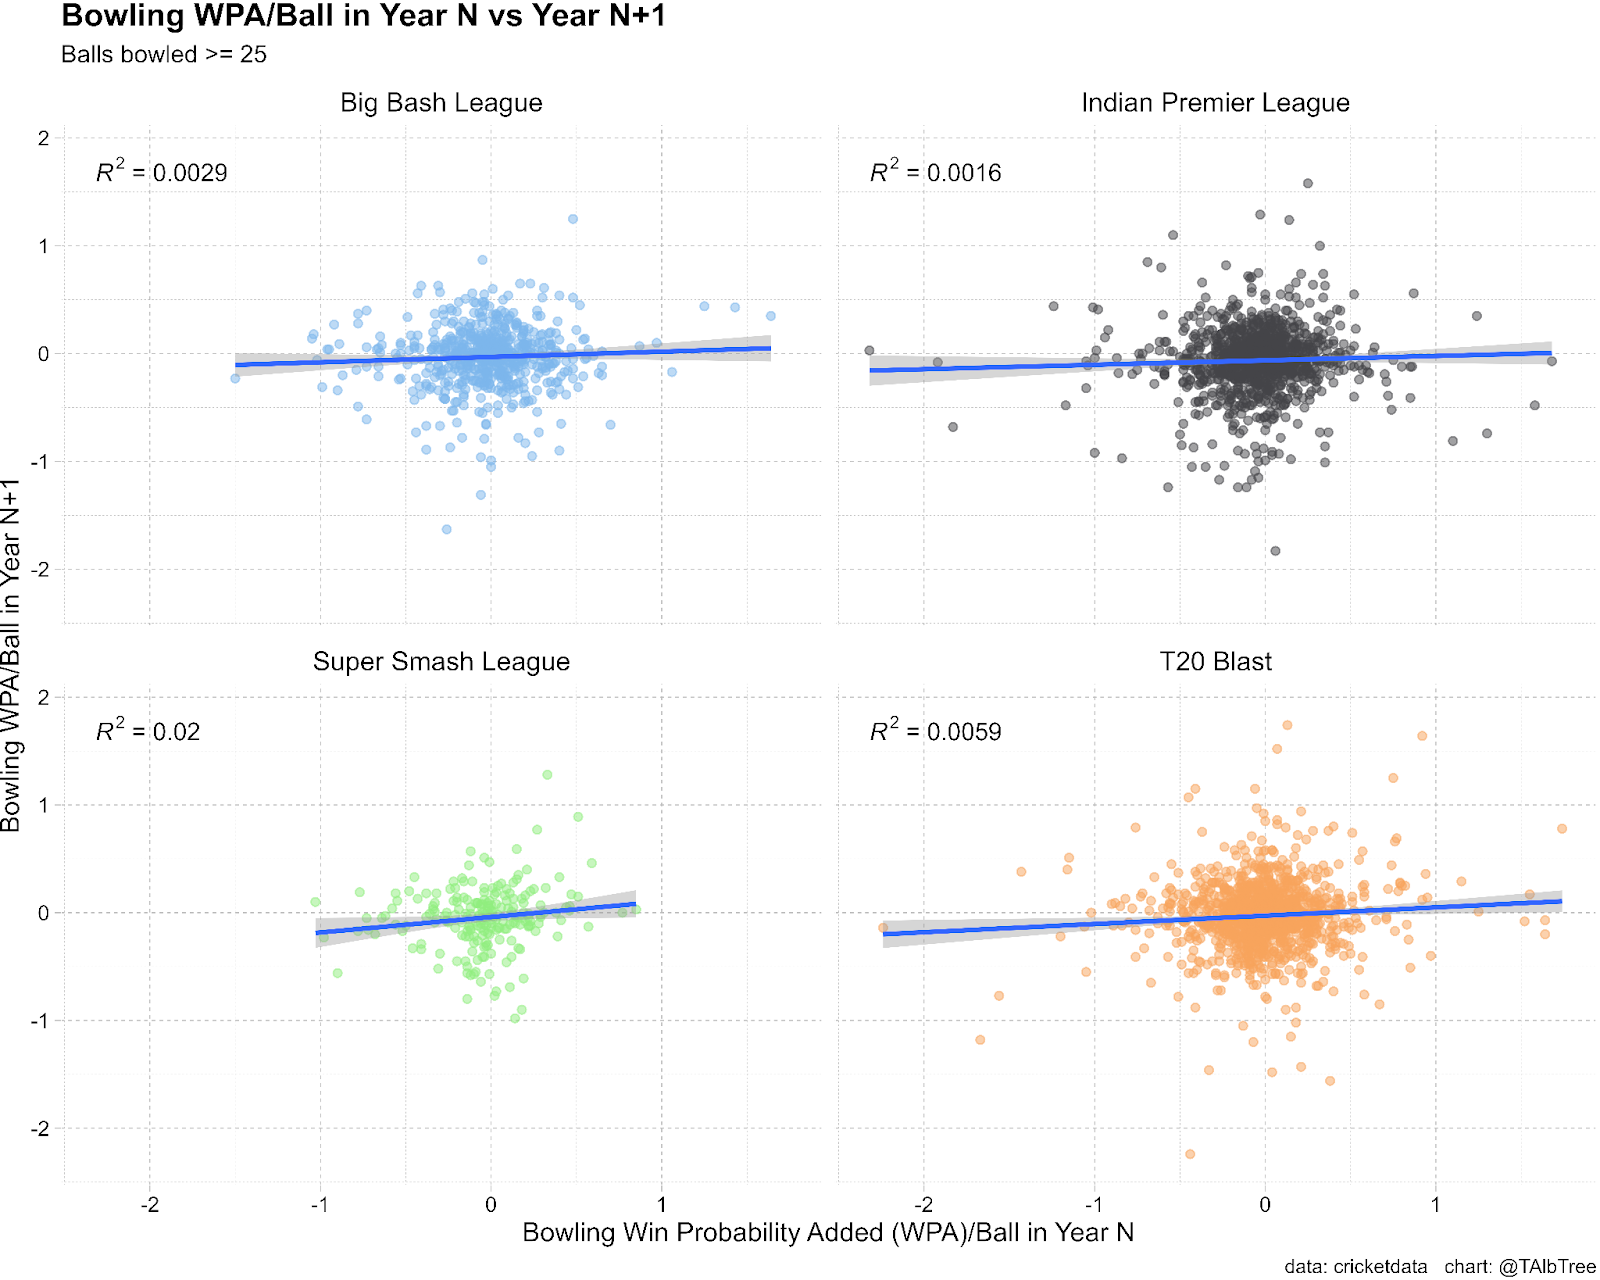 4 scatter plots of bowling WPA per ball in year N and Year N +1 across the four major Twenty20 competitions that have played more than one year (Big Bash, Indian Premier League, Super Smash League, T20 Blast). No correlation